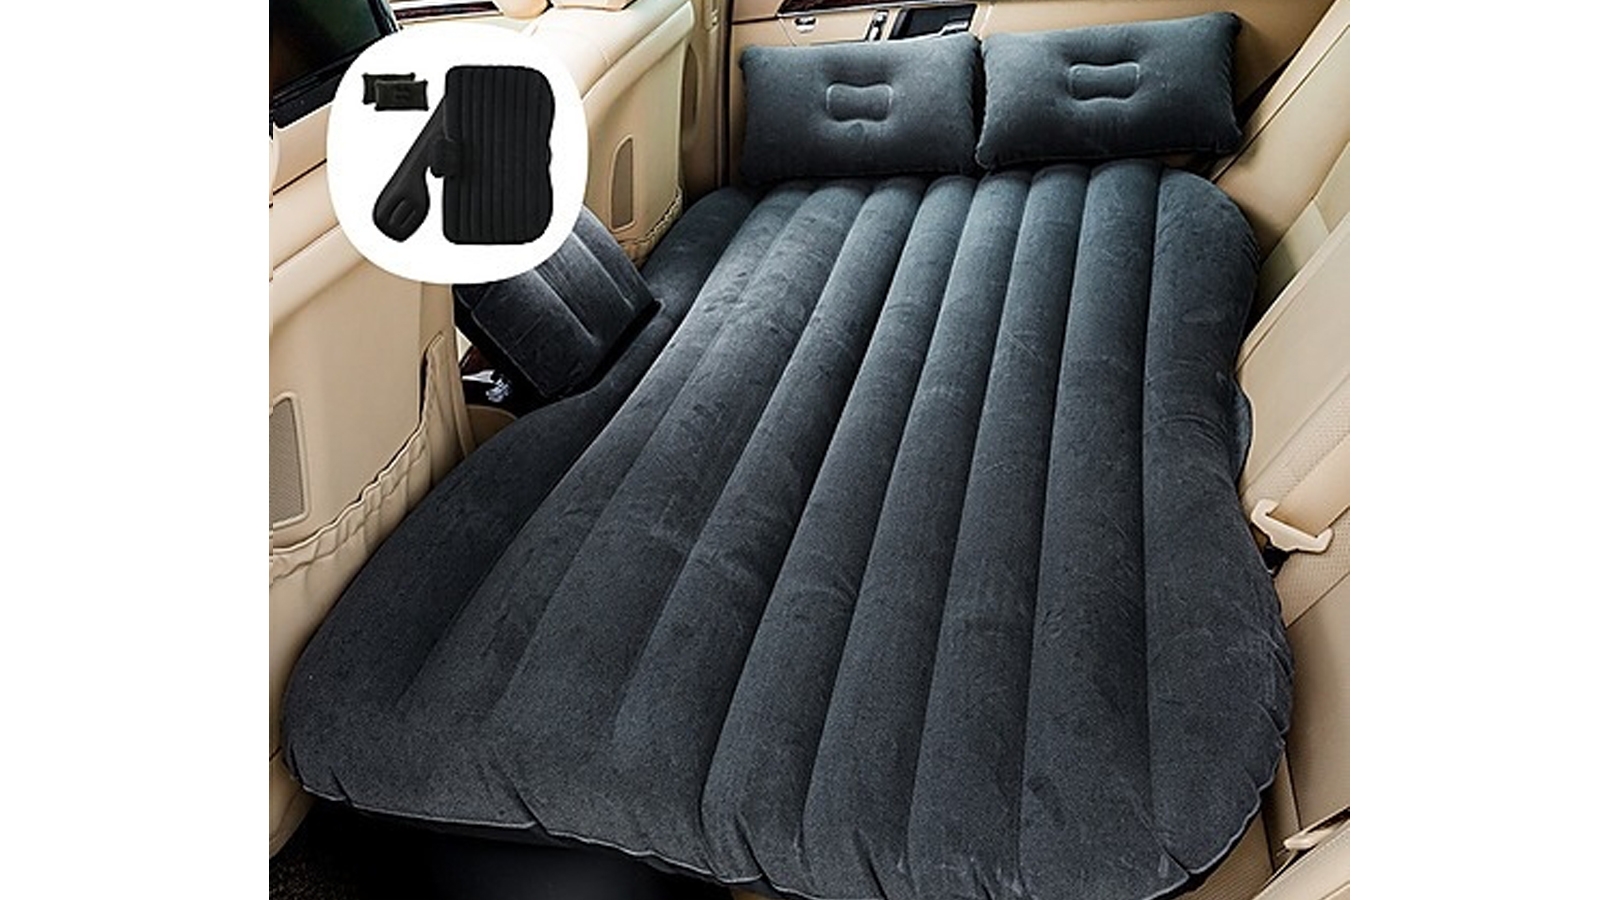 Black Most Cars and Mini Van Back Seat Portable Mattress Cushion Camping Travel Rest Sleep Universal Car Travel Inflatable Air Bed for Sedans SUV Truck 